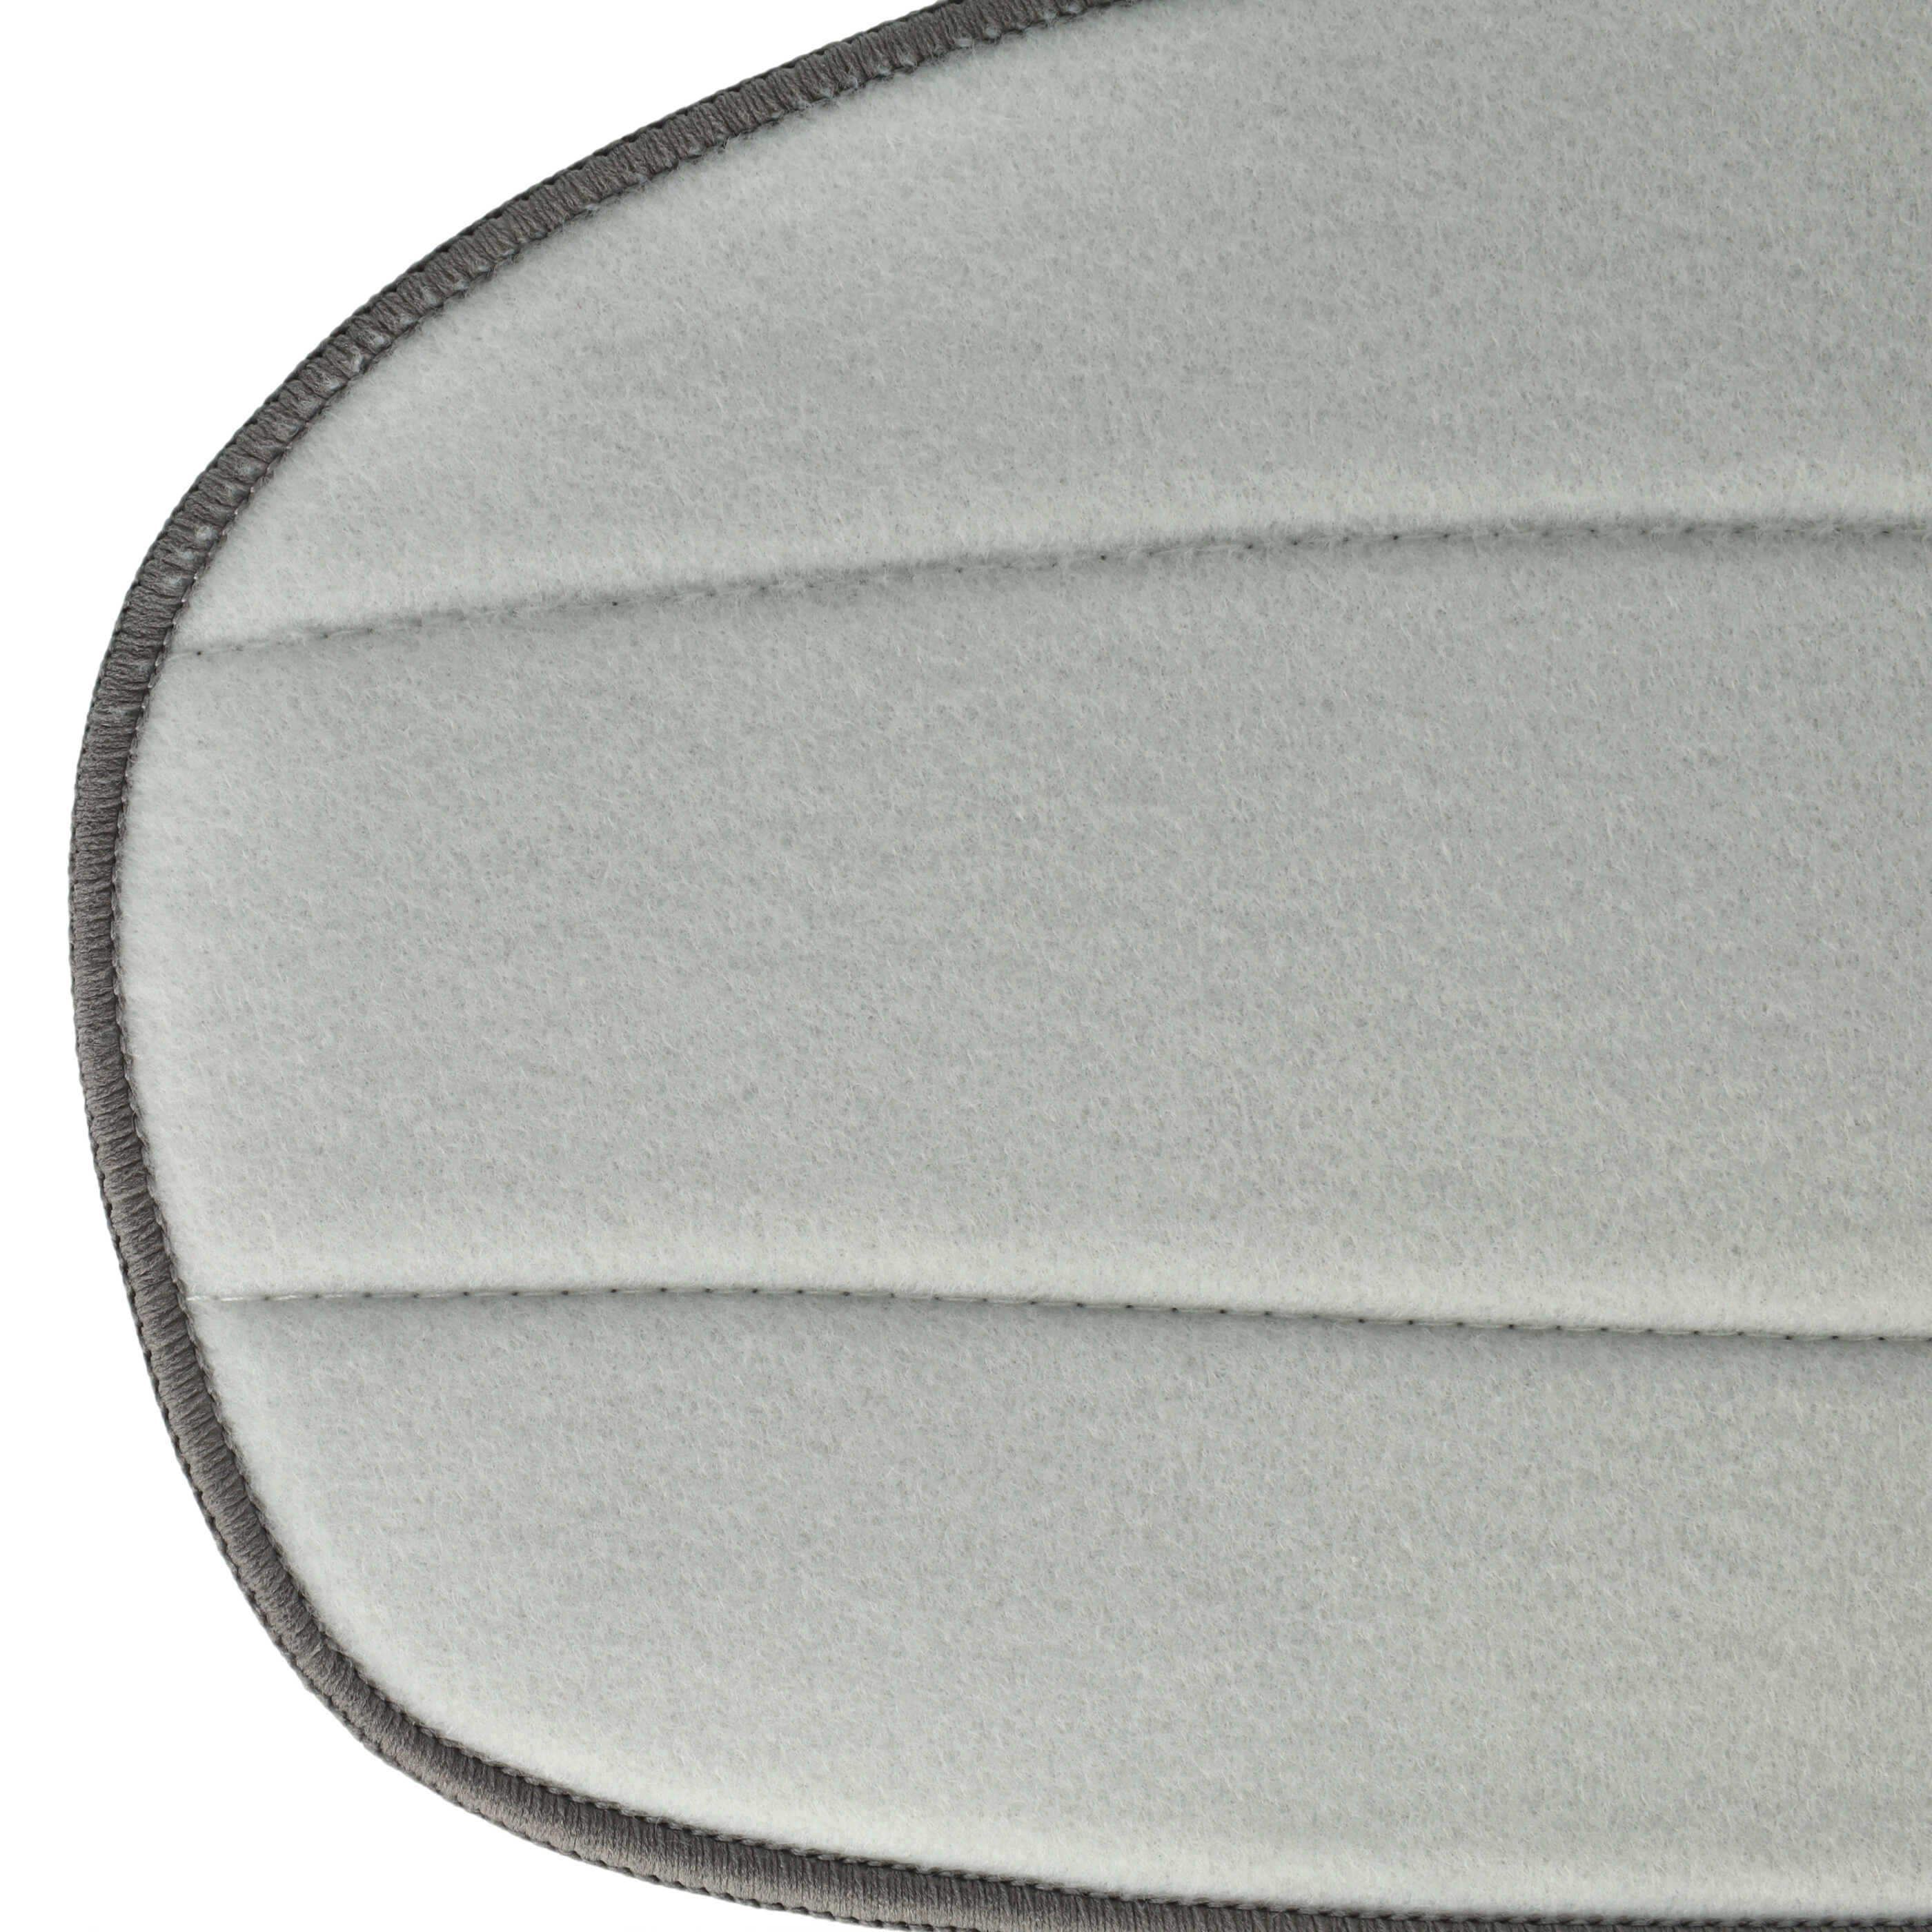 6x Cleaning Pad replaces Leifheit 11911 for LeifheitHot Spray Steamer, Steam Mop - Microfibre Grey